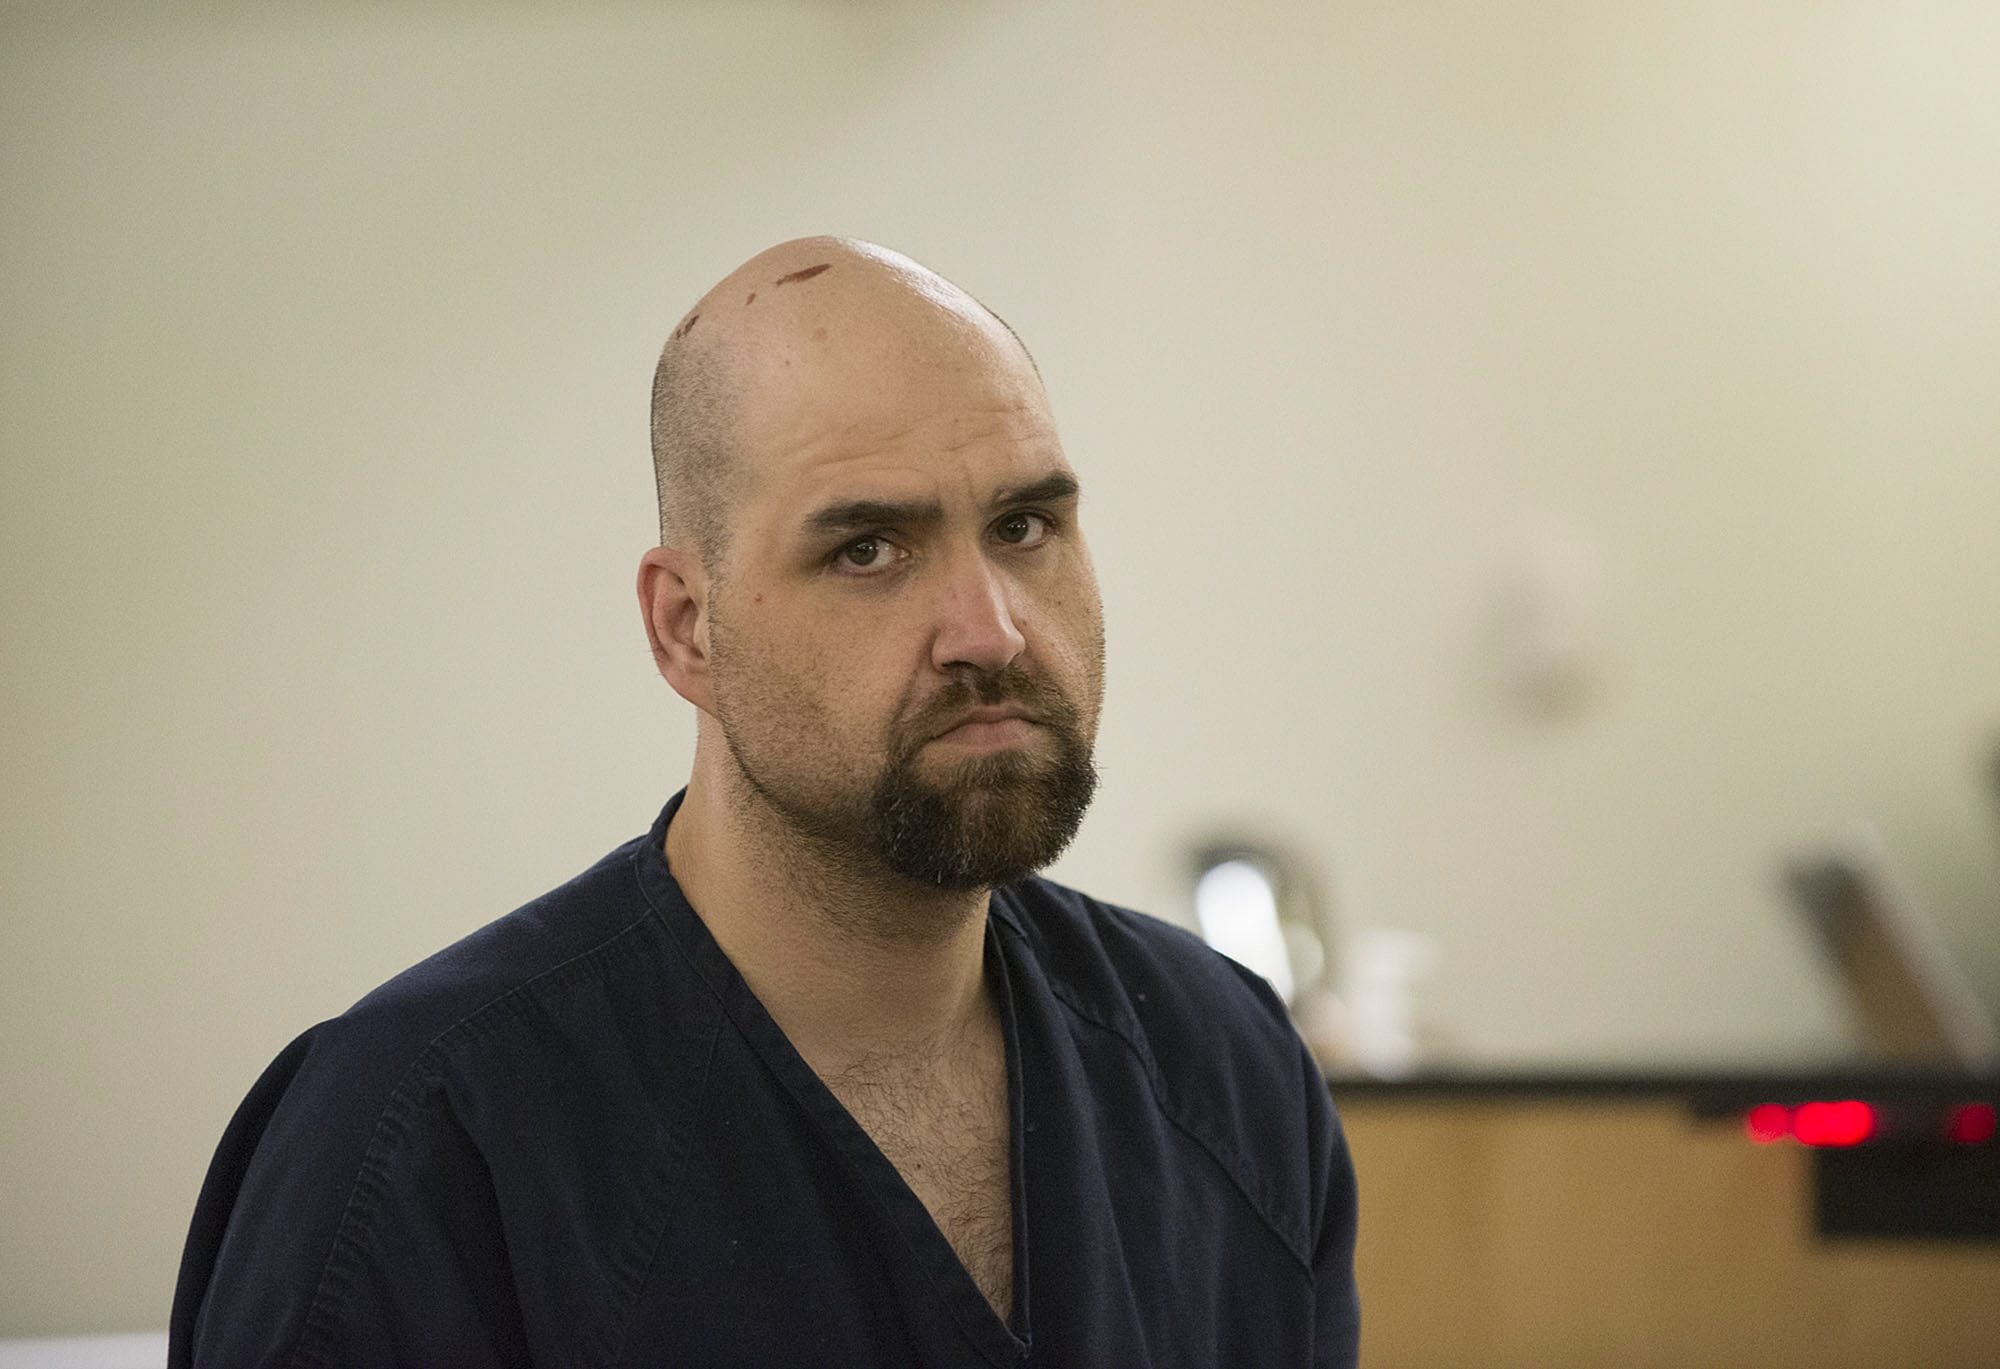 Howard E. Morrow, 36, of Battle Ground makes a first appearance Monday in Clark County Superior Court on suspicion of vehicular assault-DUI in connection with a Friday night crash on state Highway 502.